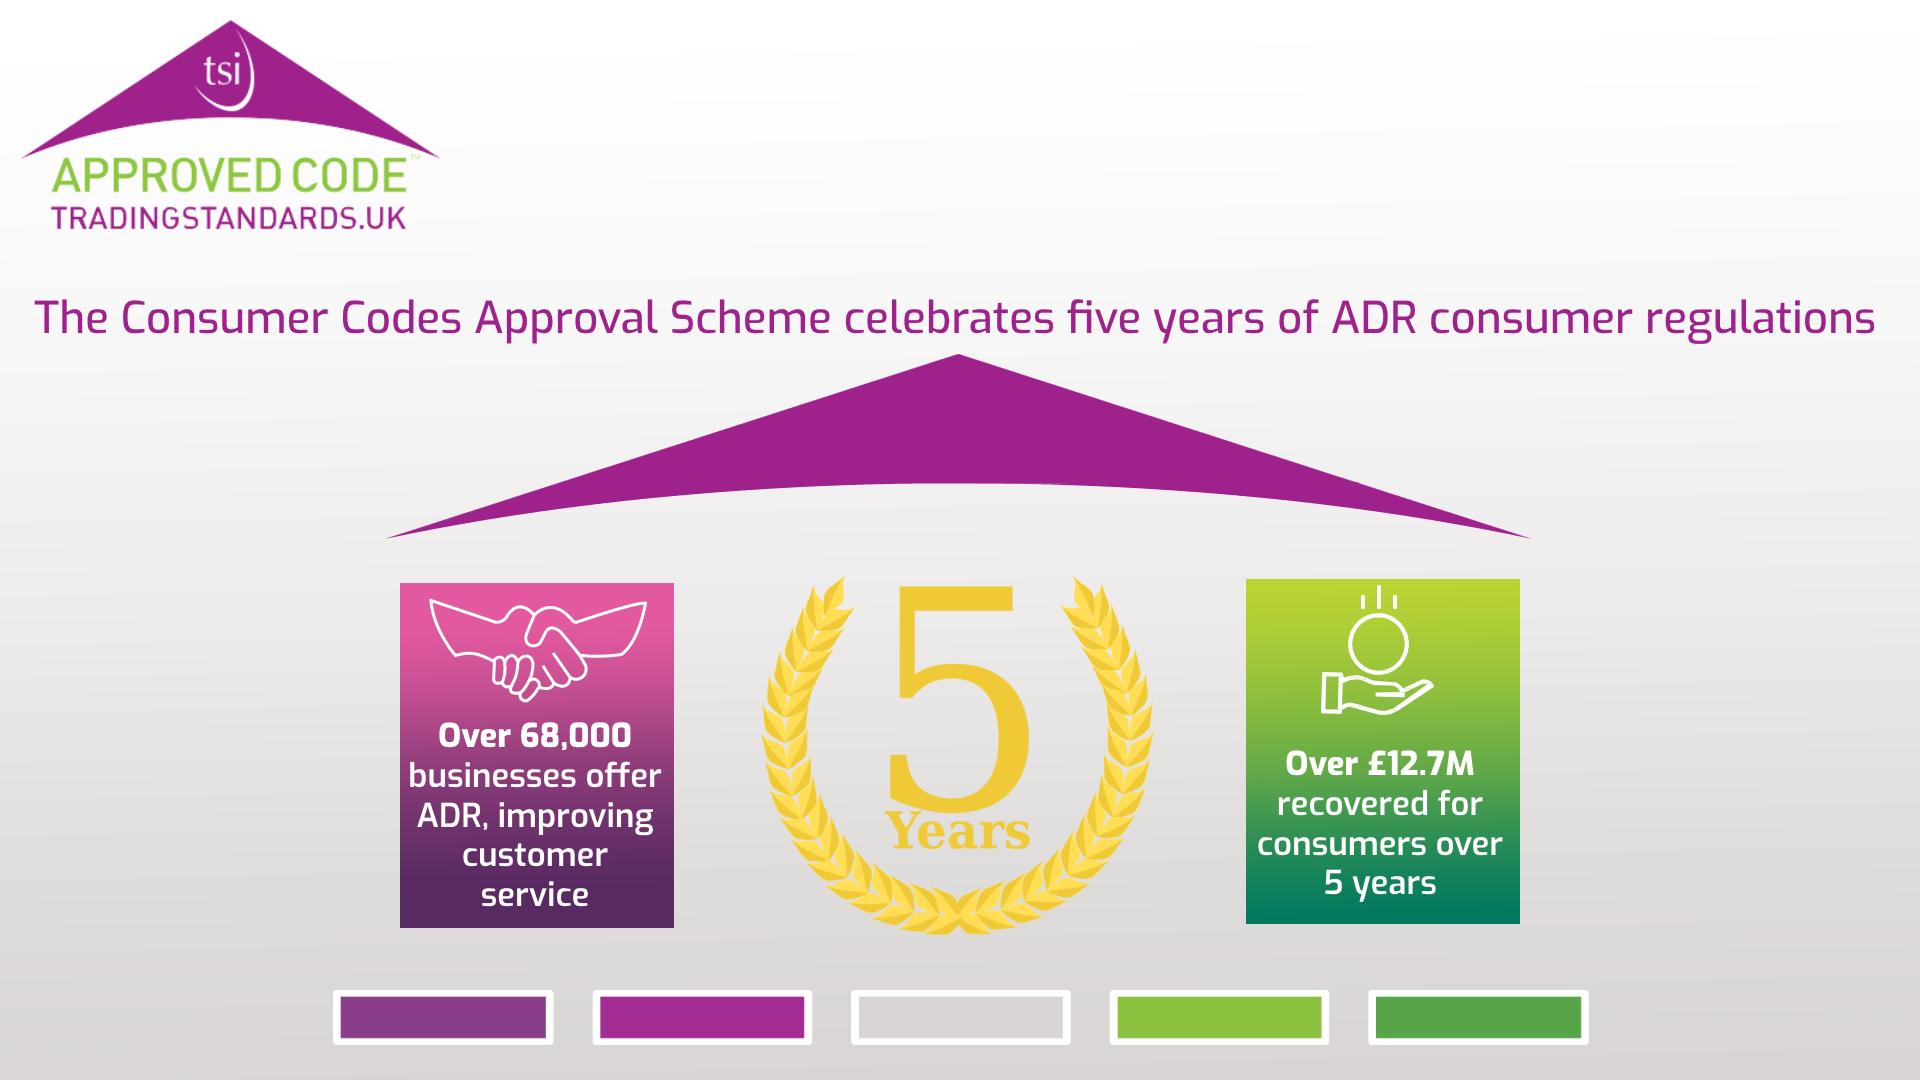 CCAS celebrates five years of ADR with £12.7M consumer recovery